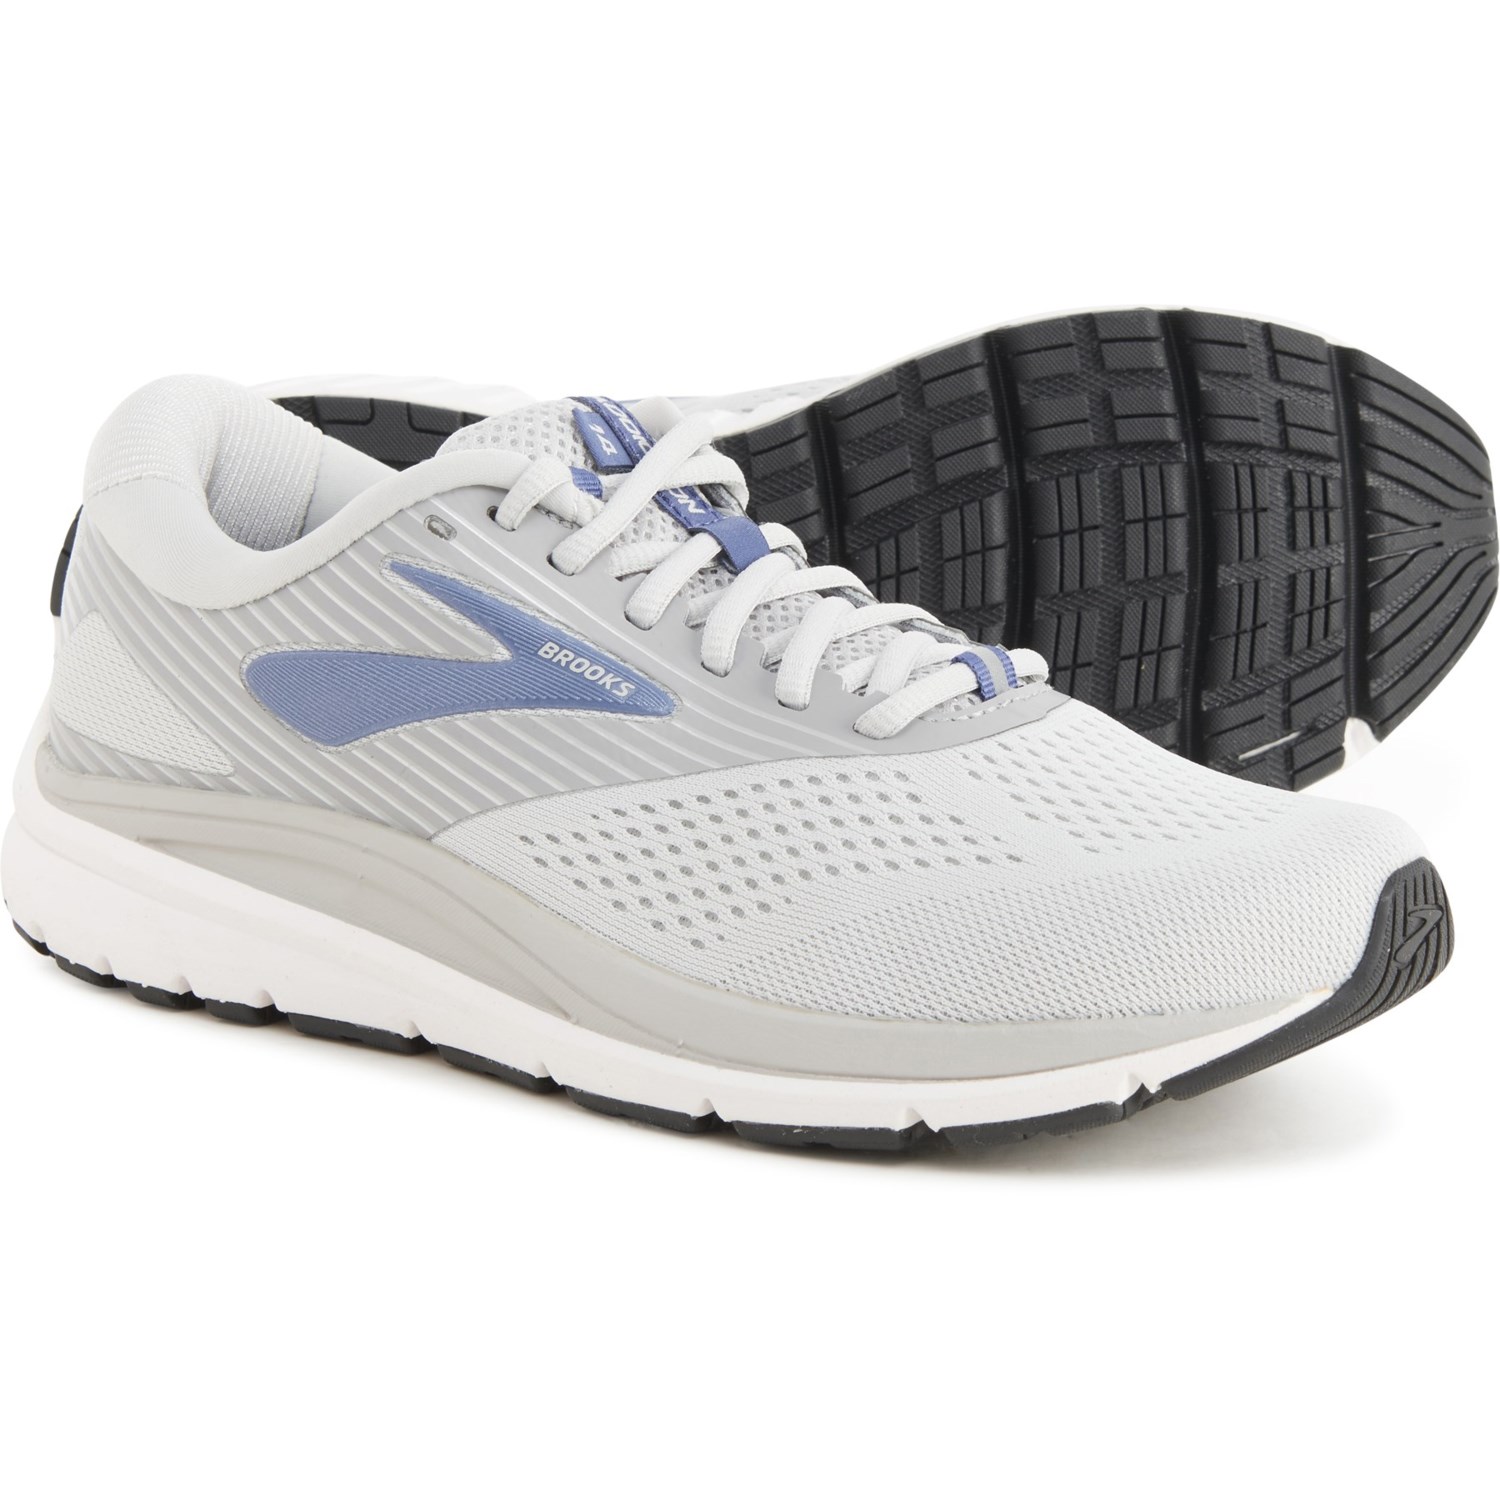 Brooks Addiction 14 Running Shoes (For Women)